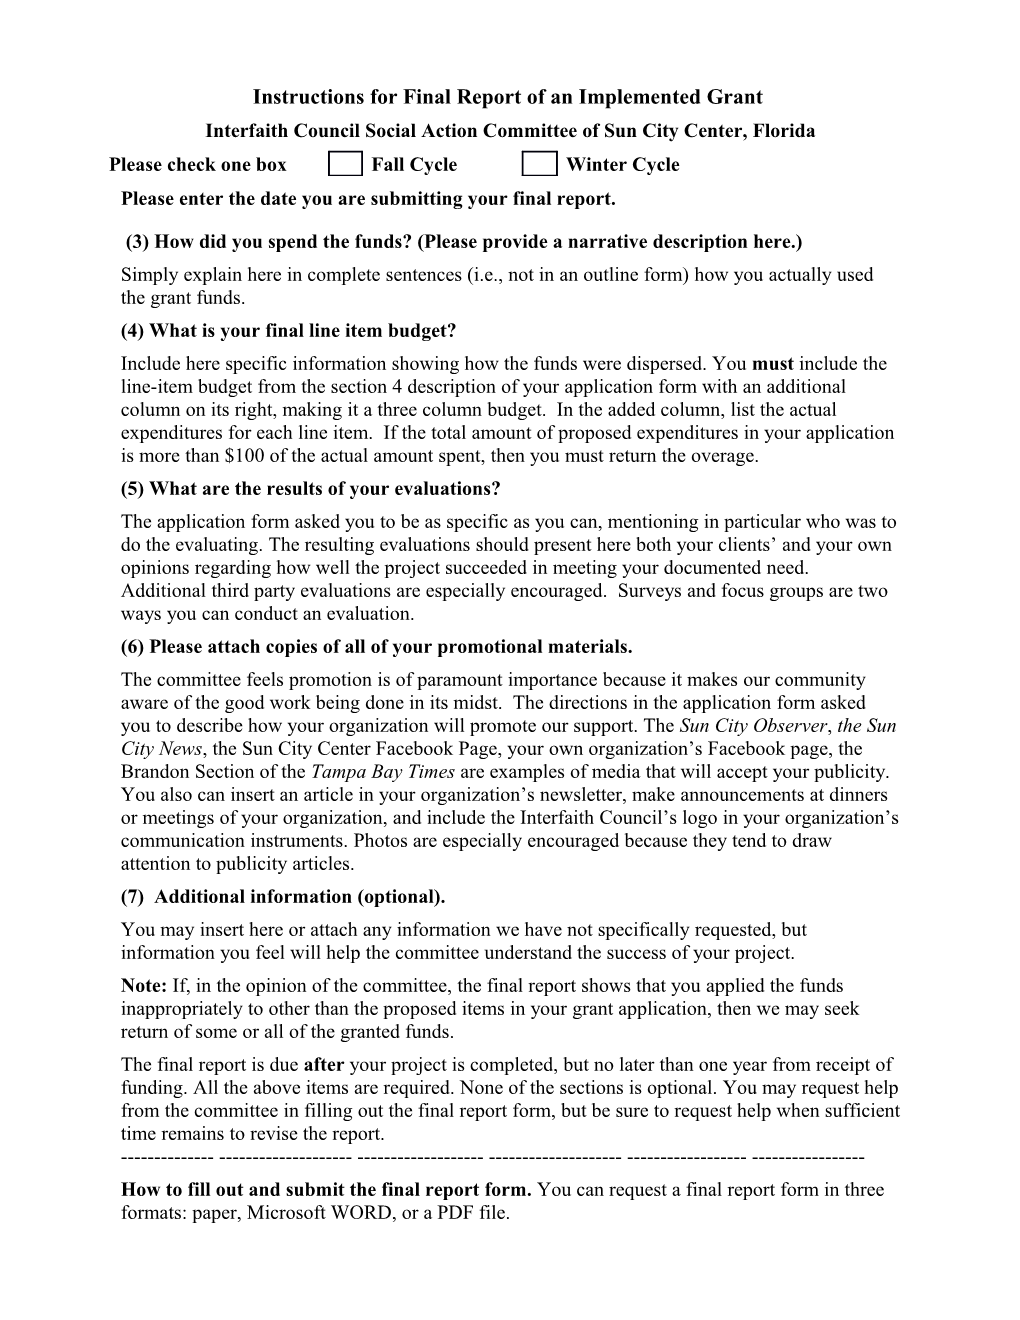 Instructions for Filling out an ICSAC Final Report, Page1